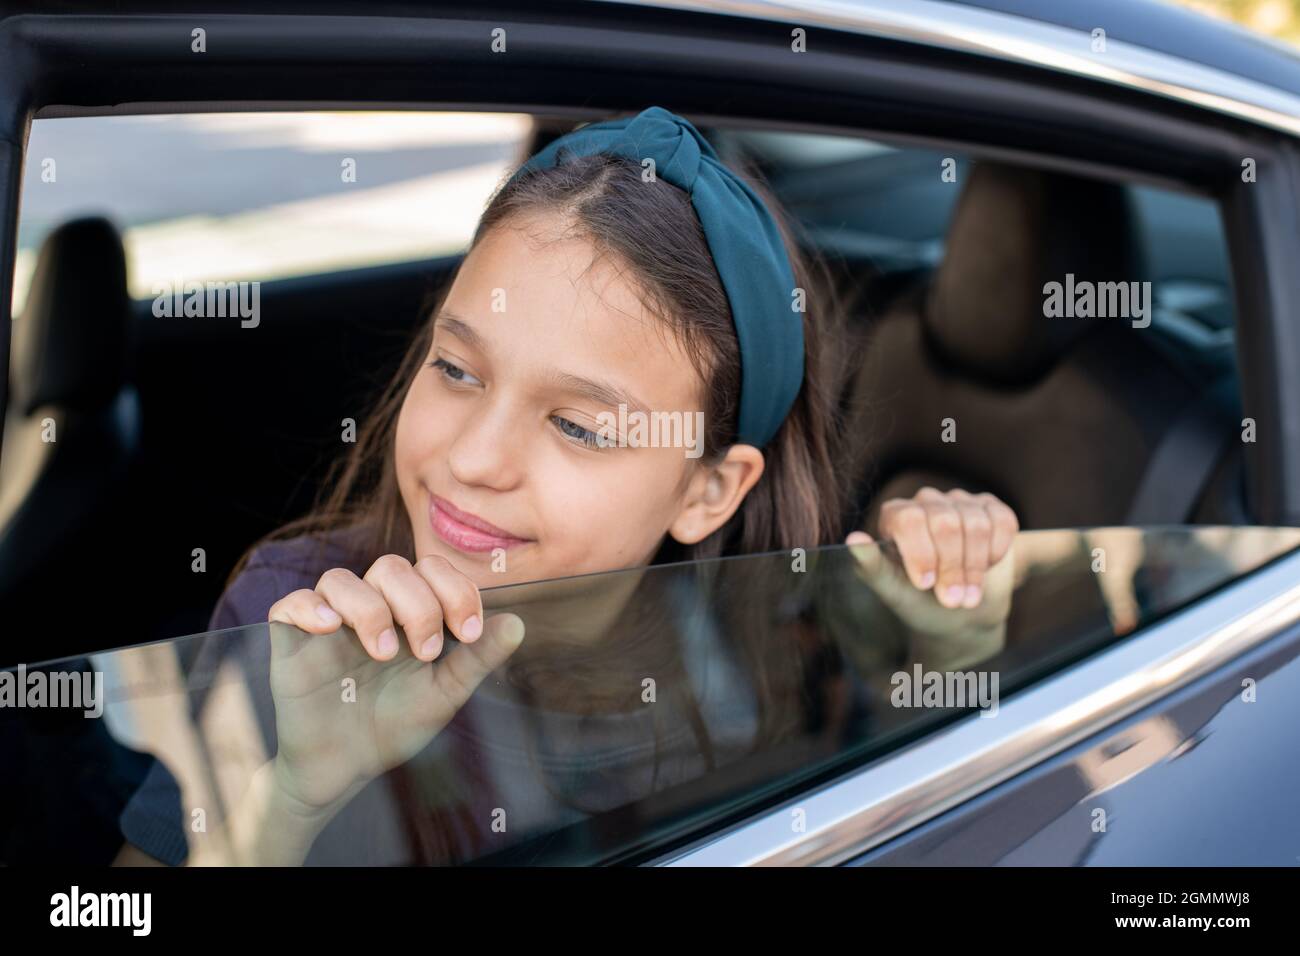 https://c8.alamy.com/comp/2GMMWJ8/adorable-schoolgirl-looking-out-of-window-of-electric-car-while-sitting-inside-2GMMWJ8.jpg